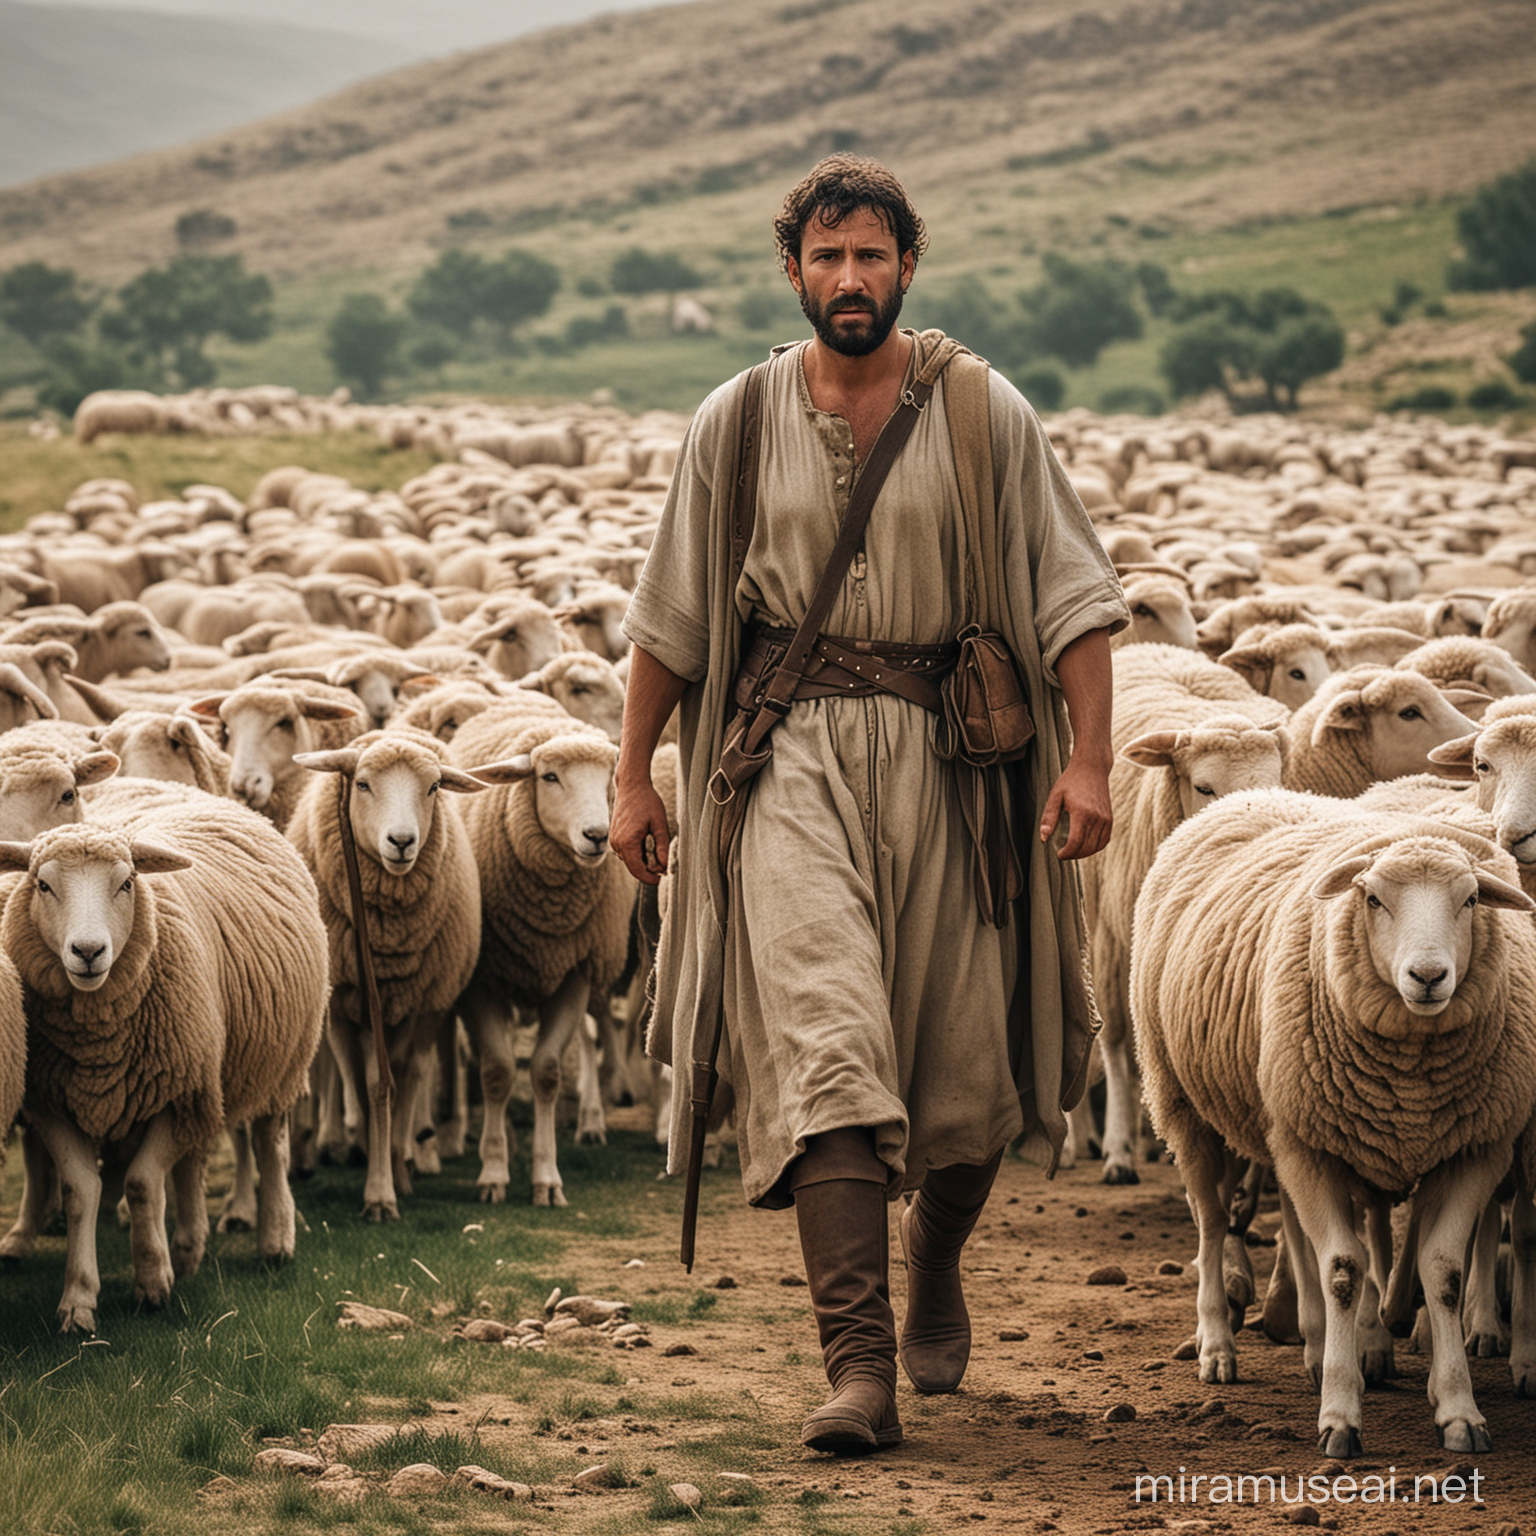 a shepherd from biblical times protecting his flock of sheep from danger